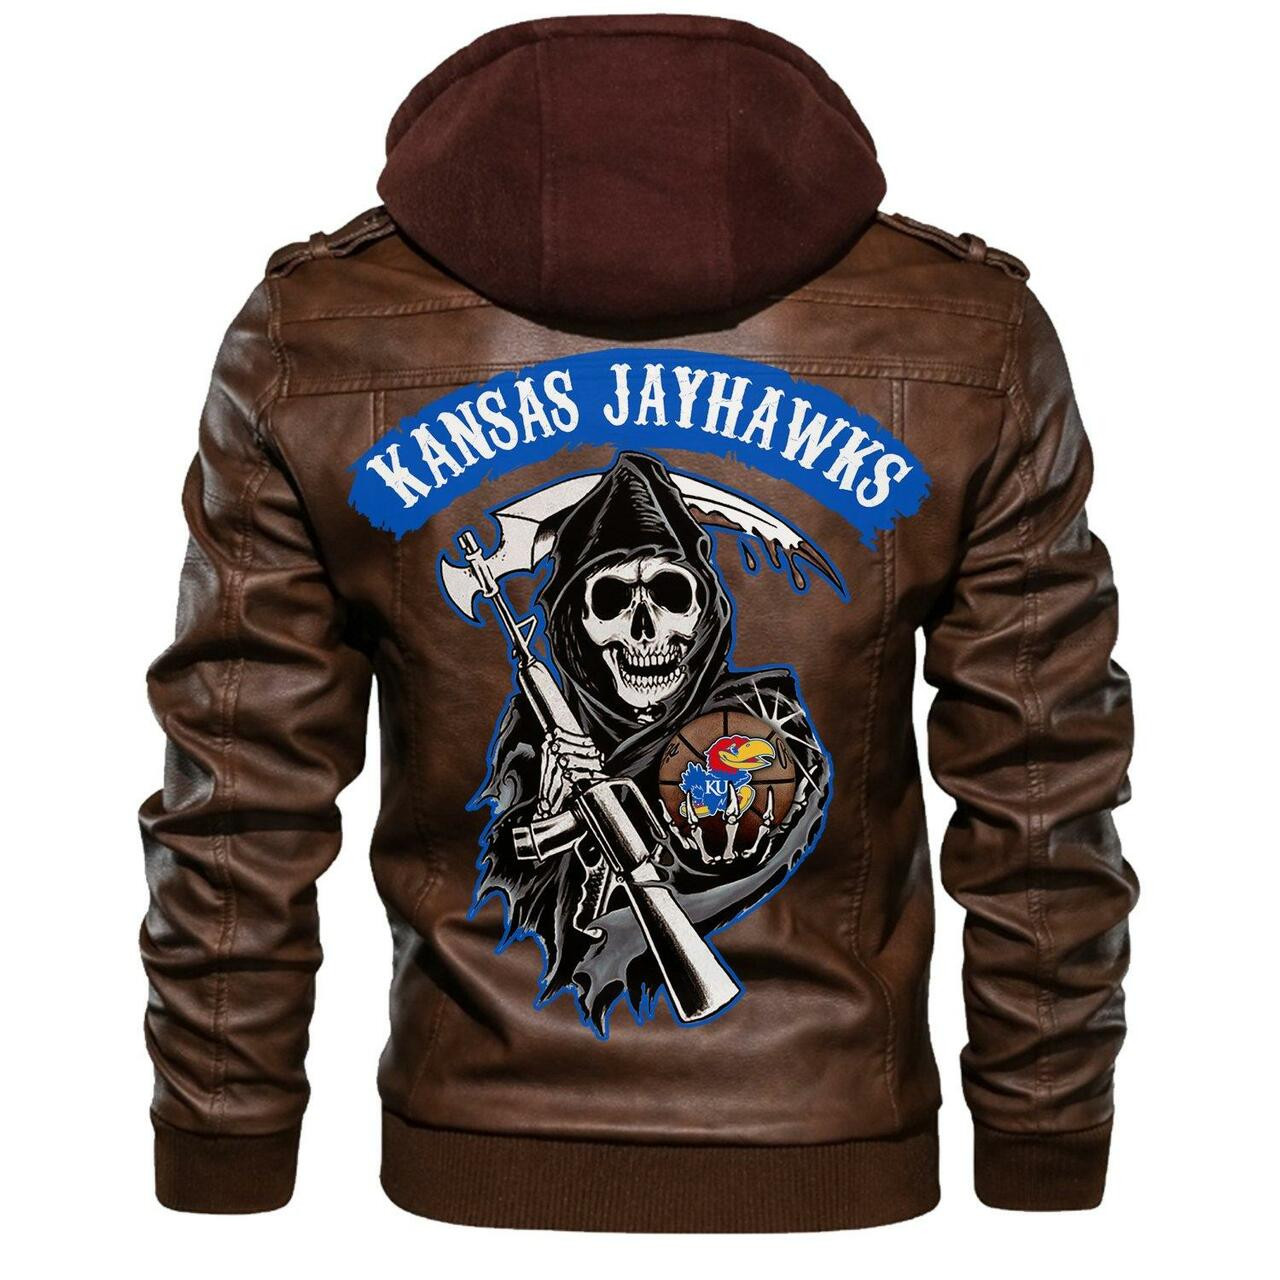 You'll get the best Leather Jacket by shopping online 58